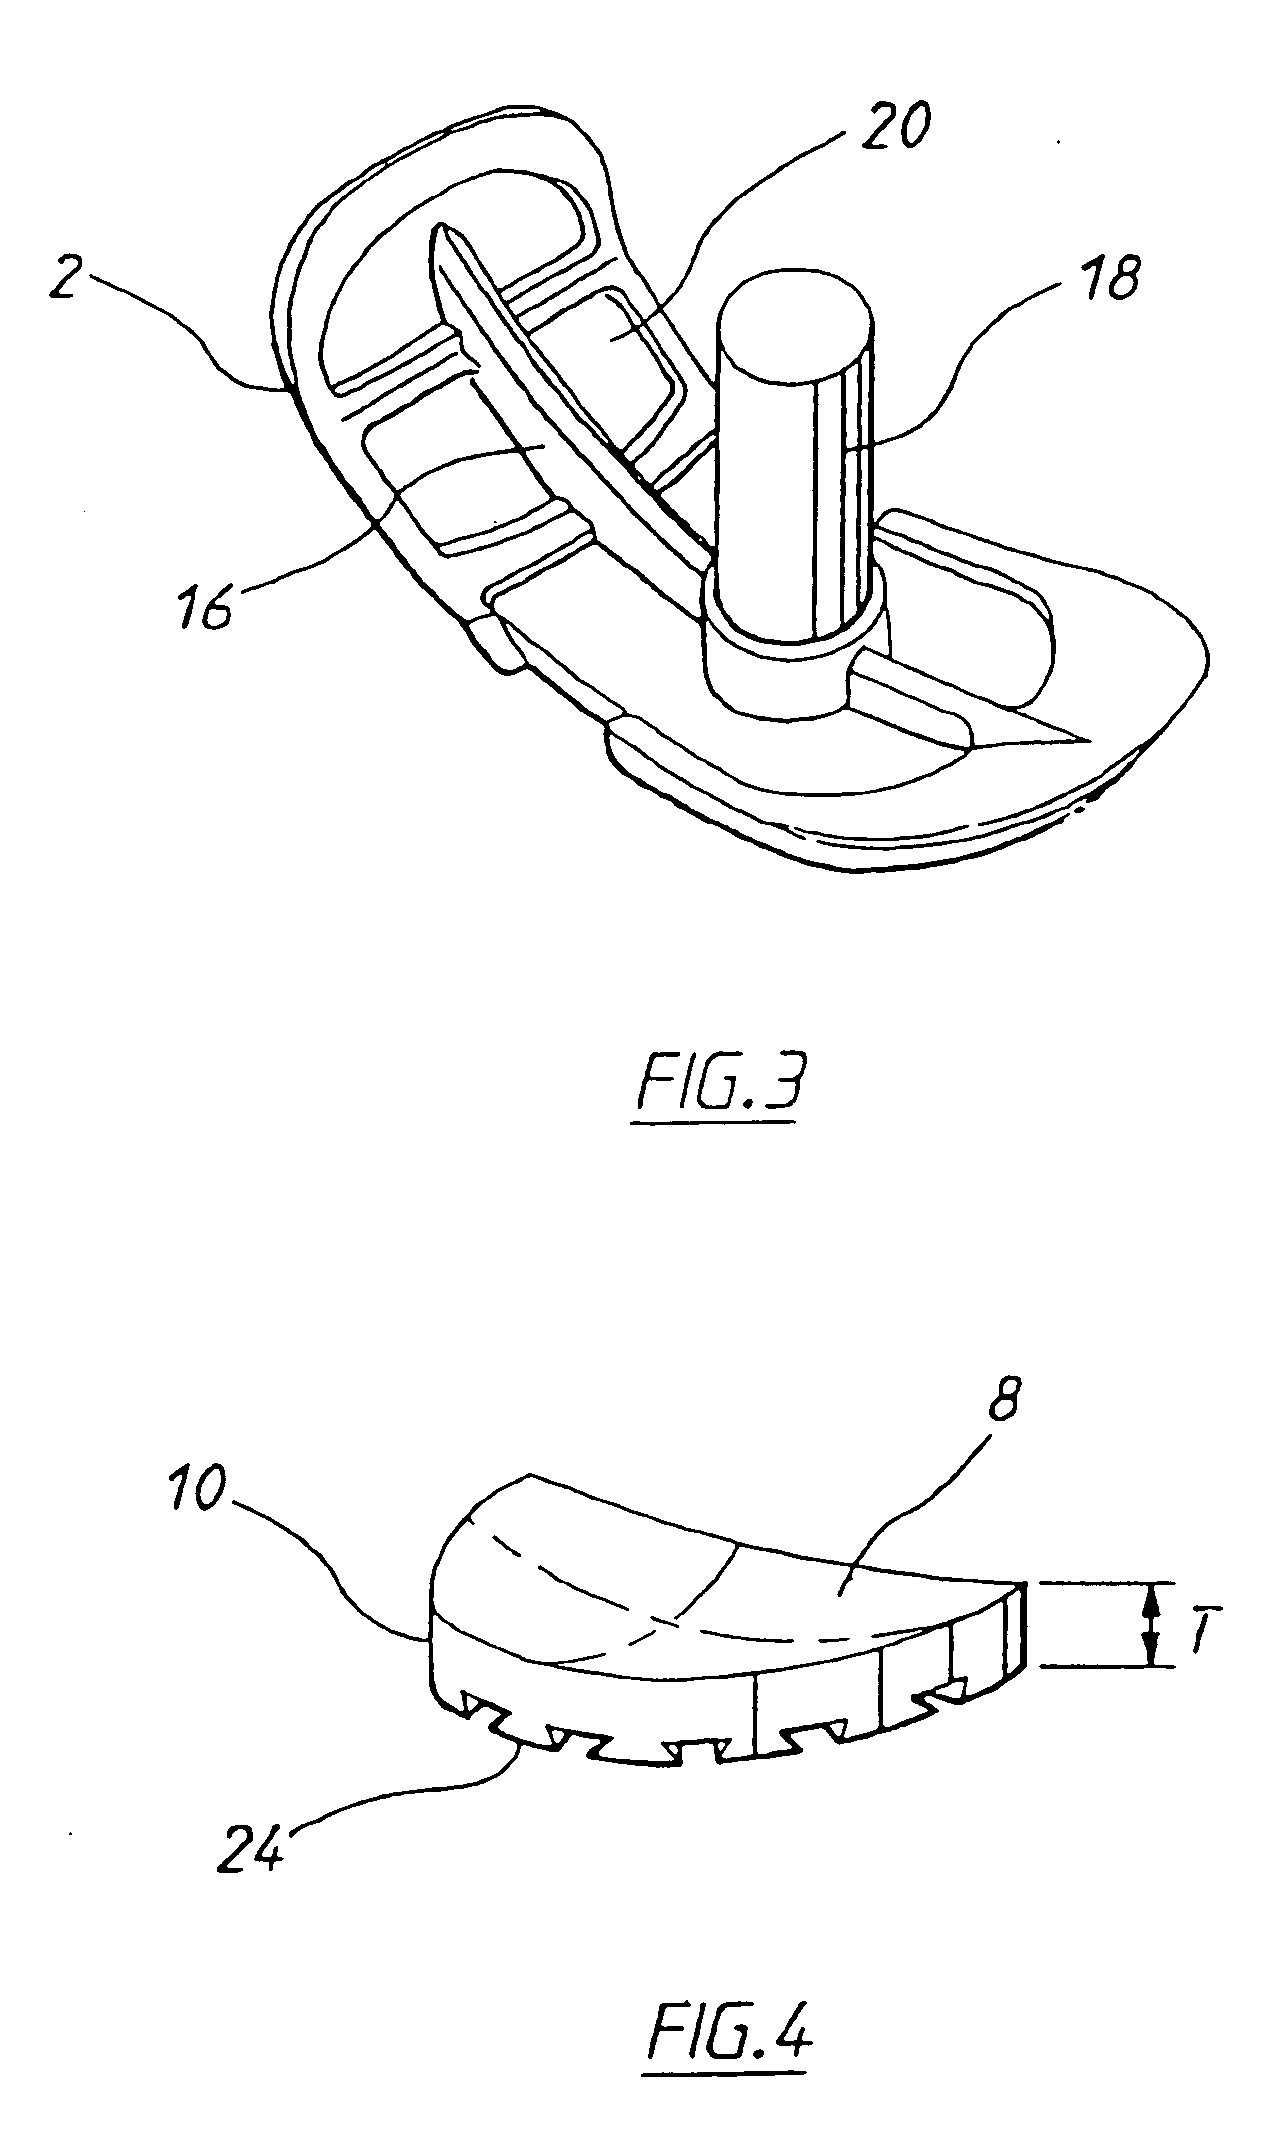 Method of arthroplastly on a knee joint and apparatus for use in same